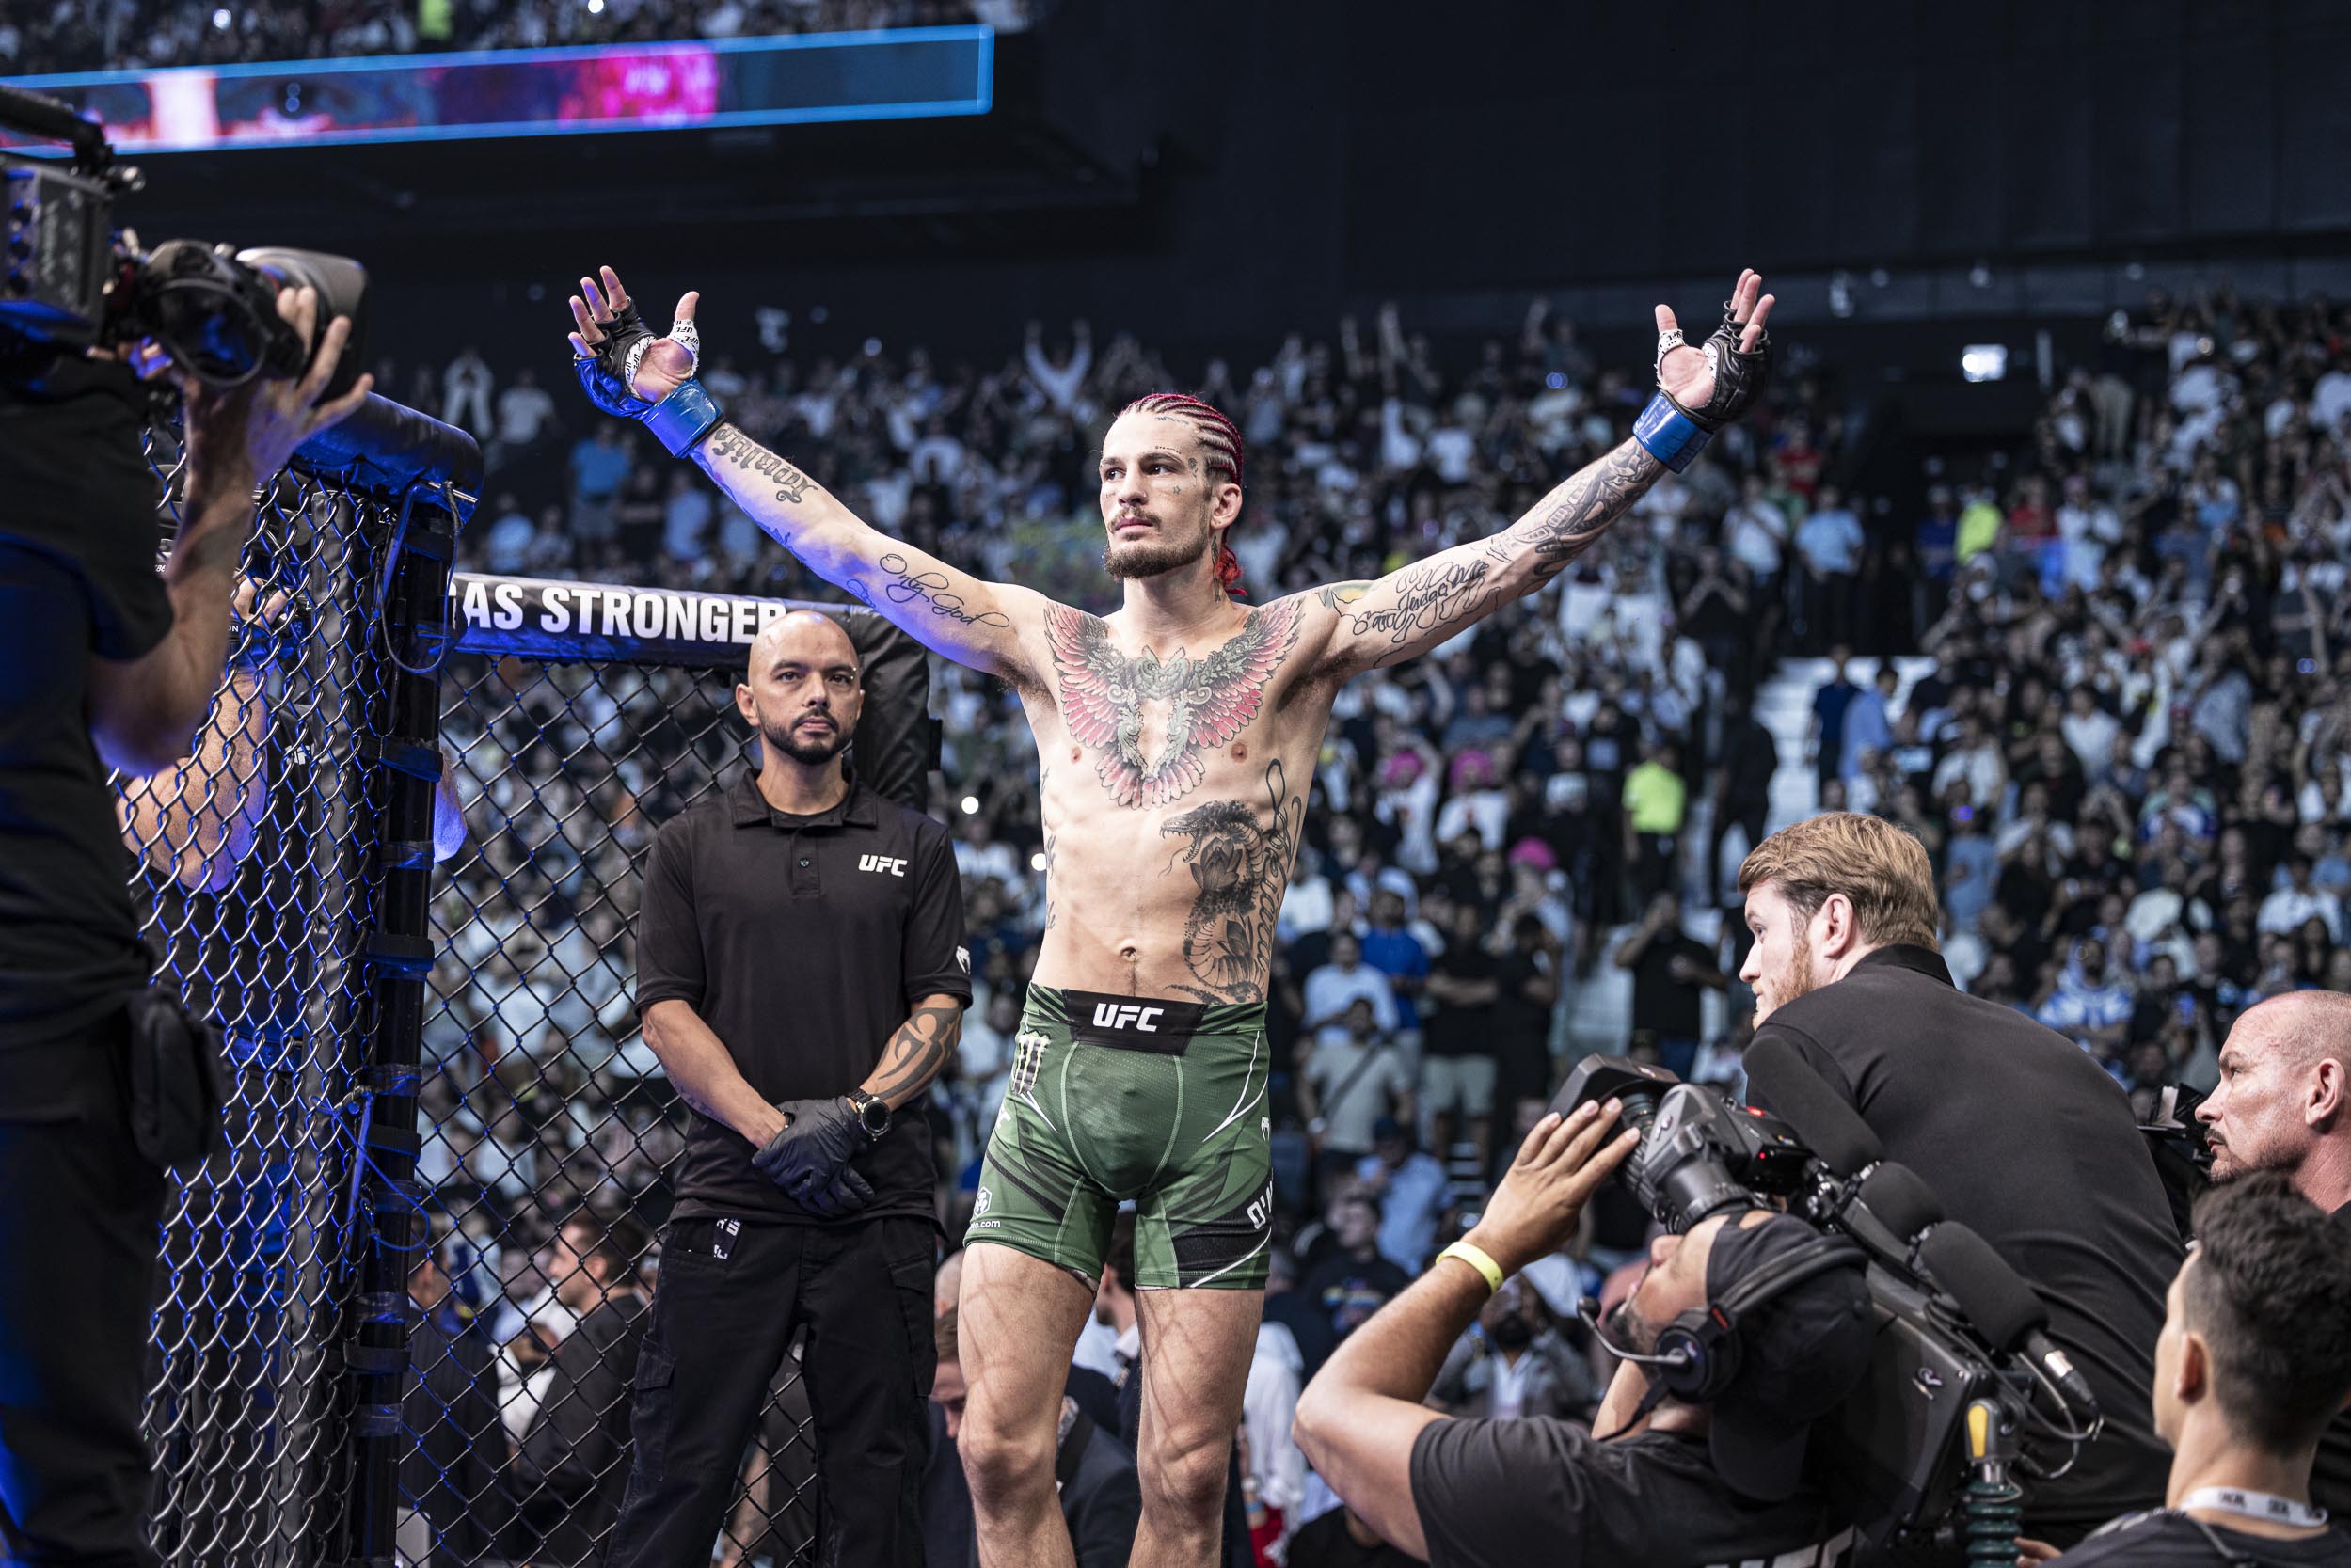 Sean O’Malley next fight: “Sugar” fights for gold in UFC 292 main event